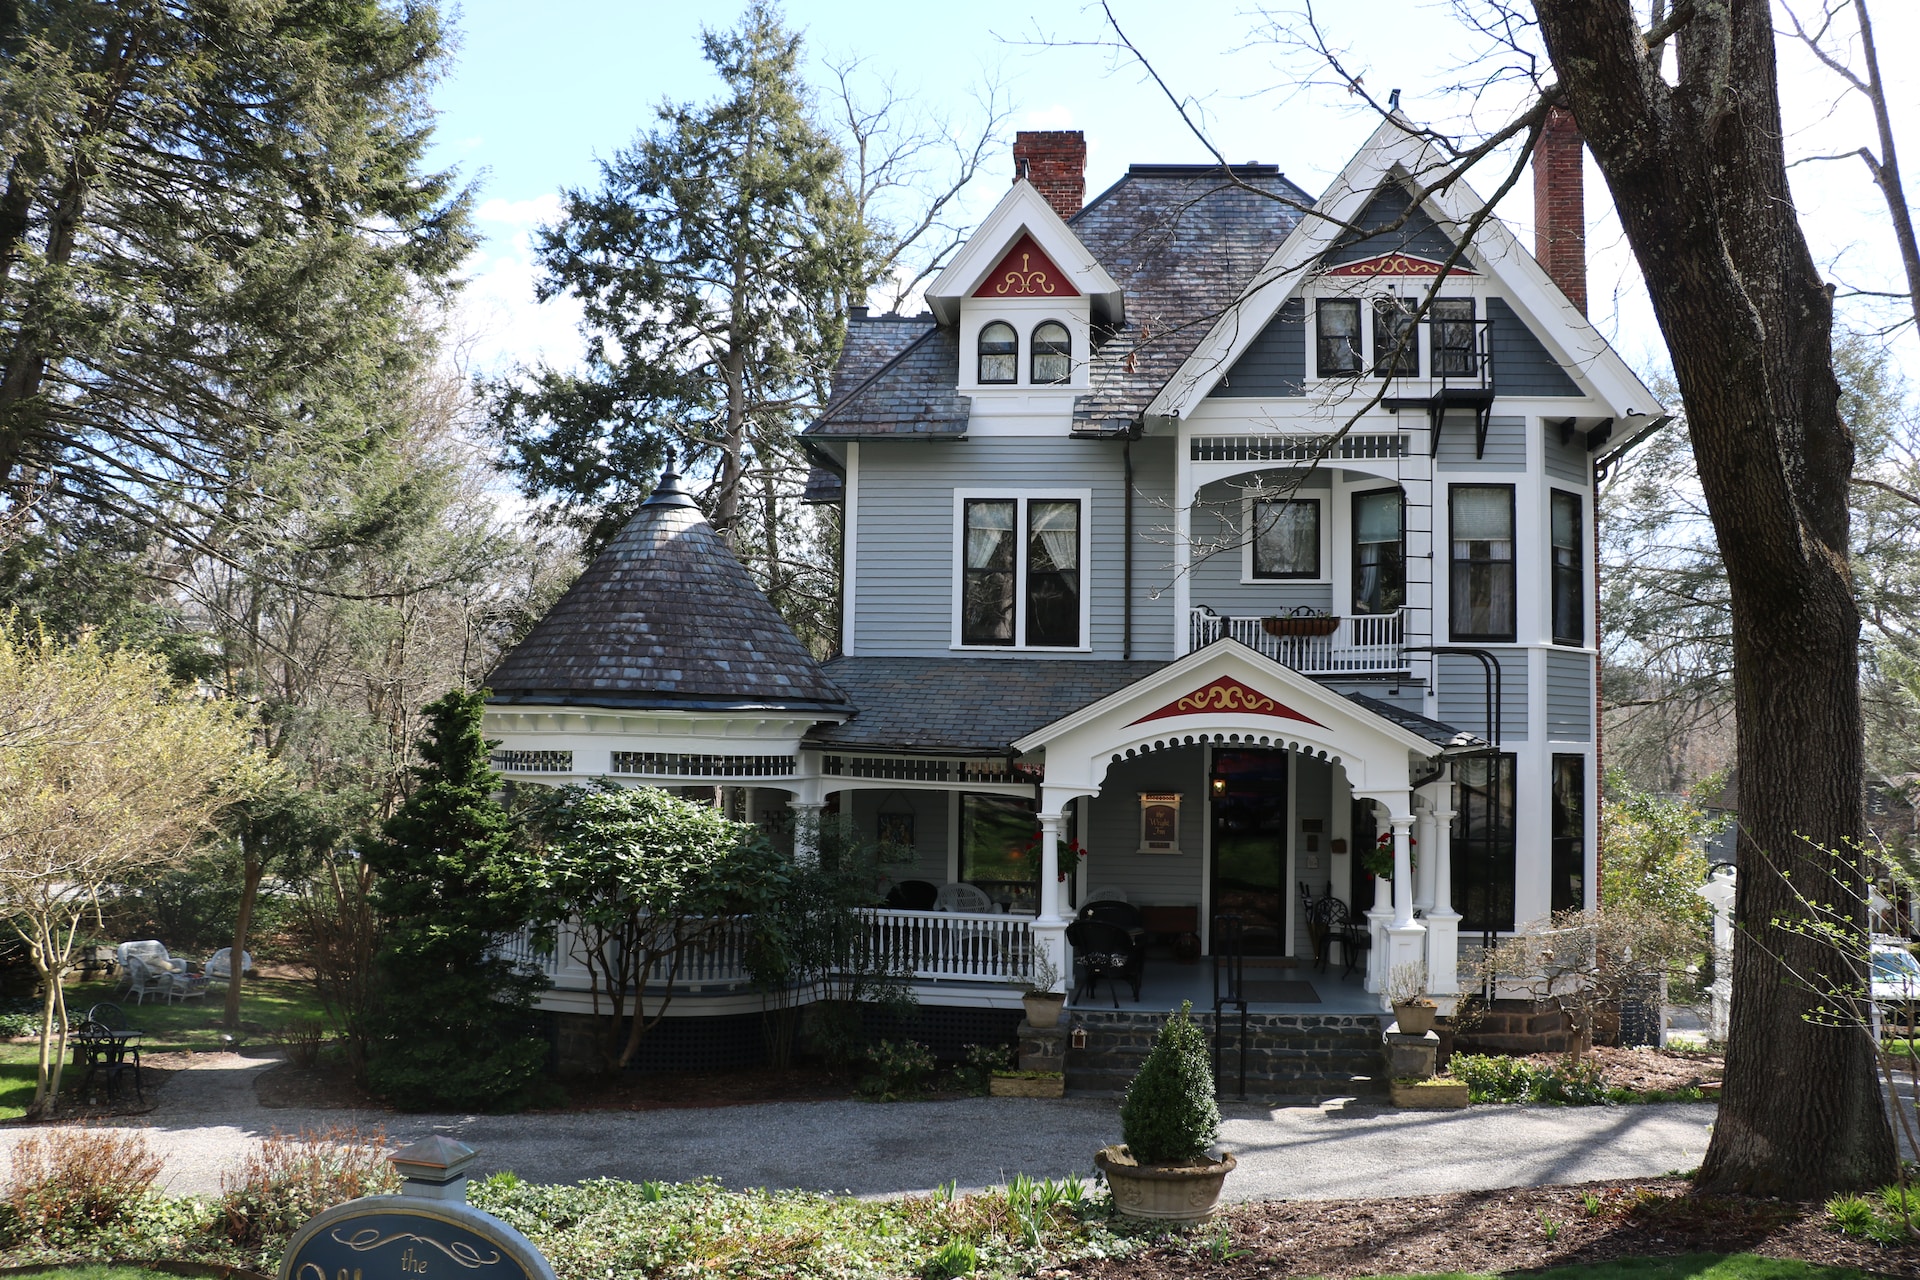 A charming bed and breakfast in Asheville, NC.